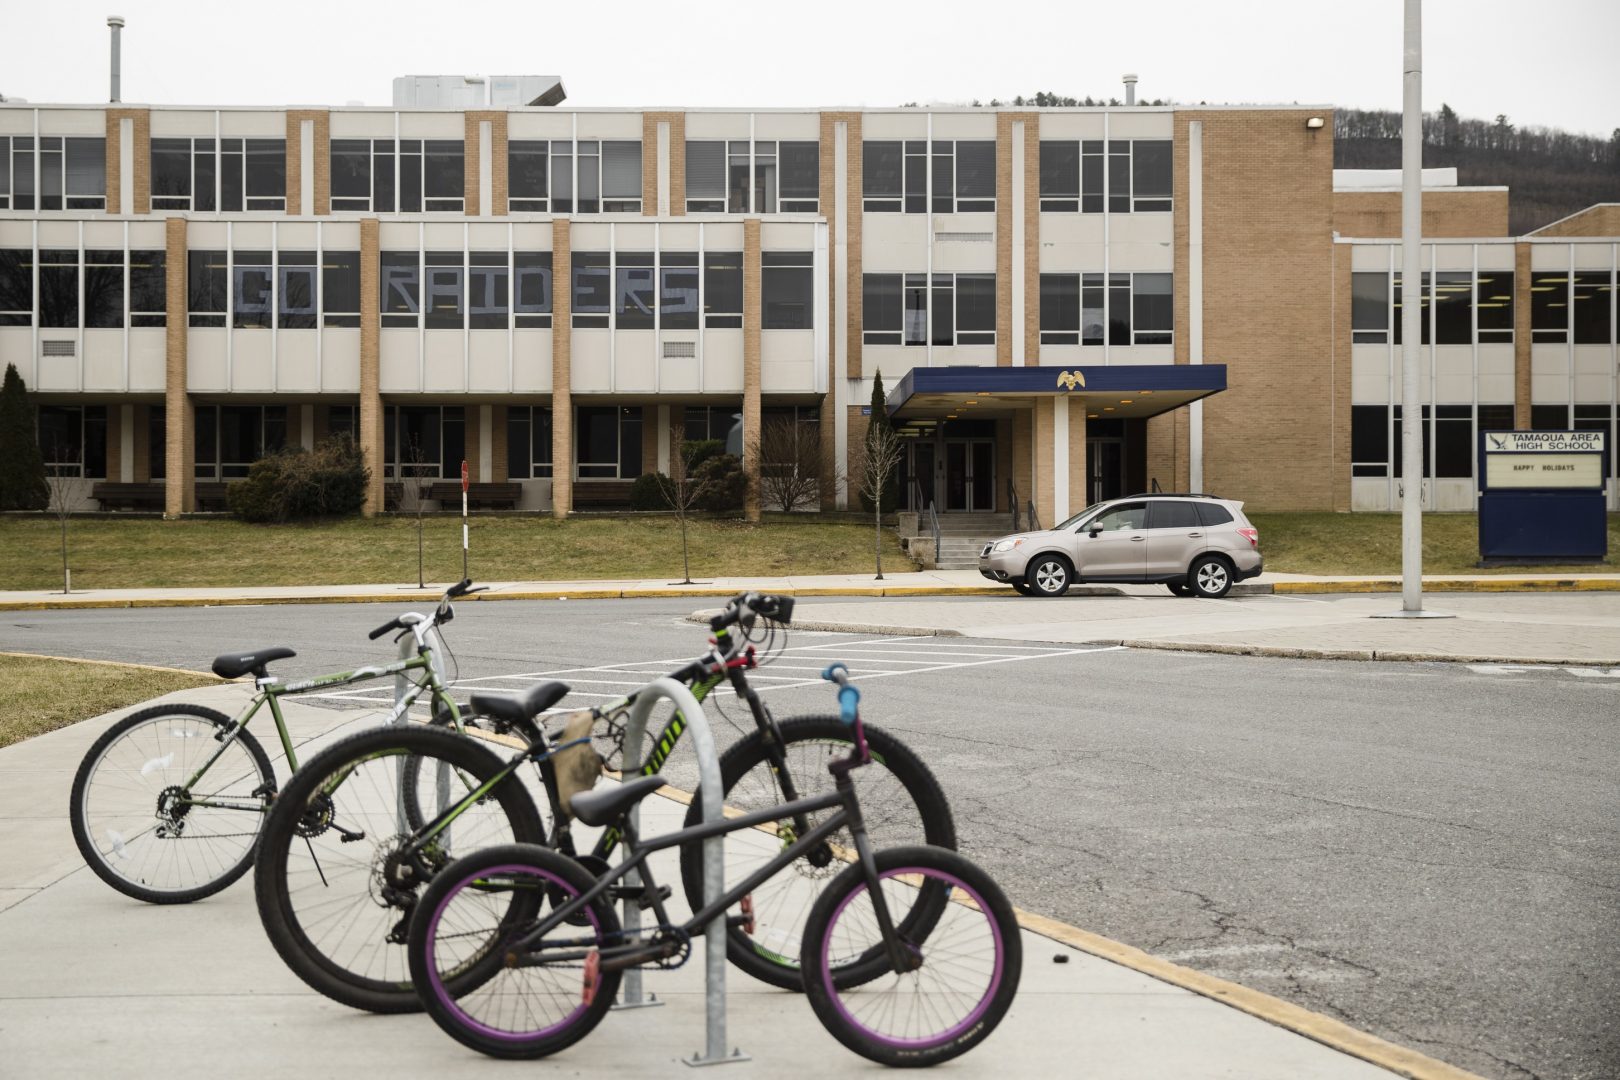 Bicycles are parked outside Tamaqua Area High School in Tamaqua, Pa., Friday, Jan. 4, 2019.